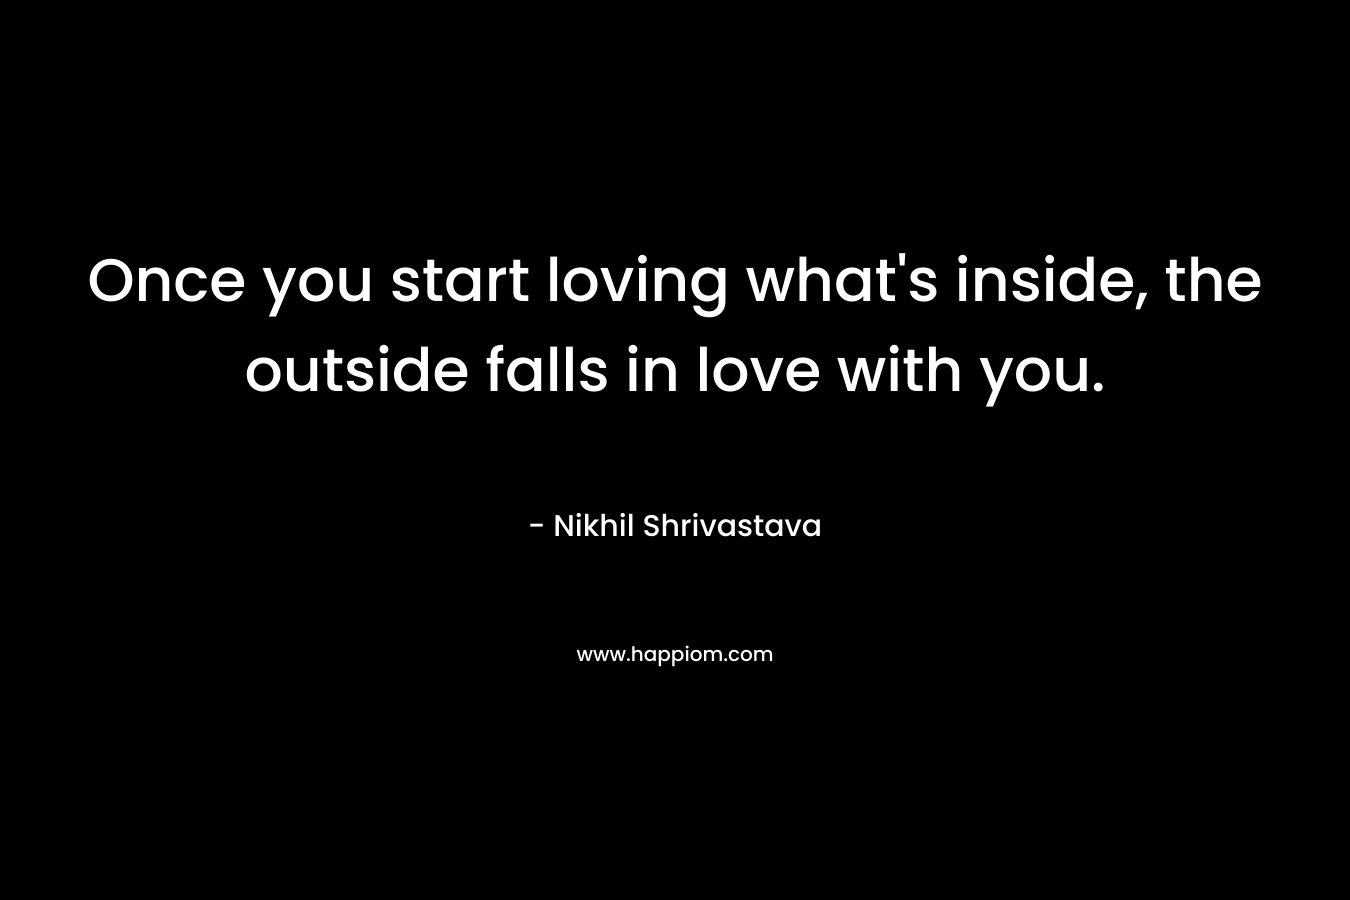 Once you start loving what's inside, the outside falls in love with you.